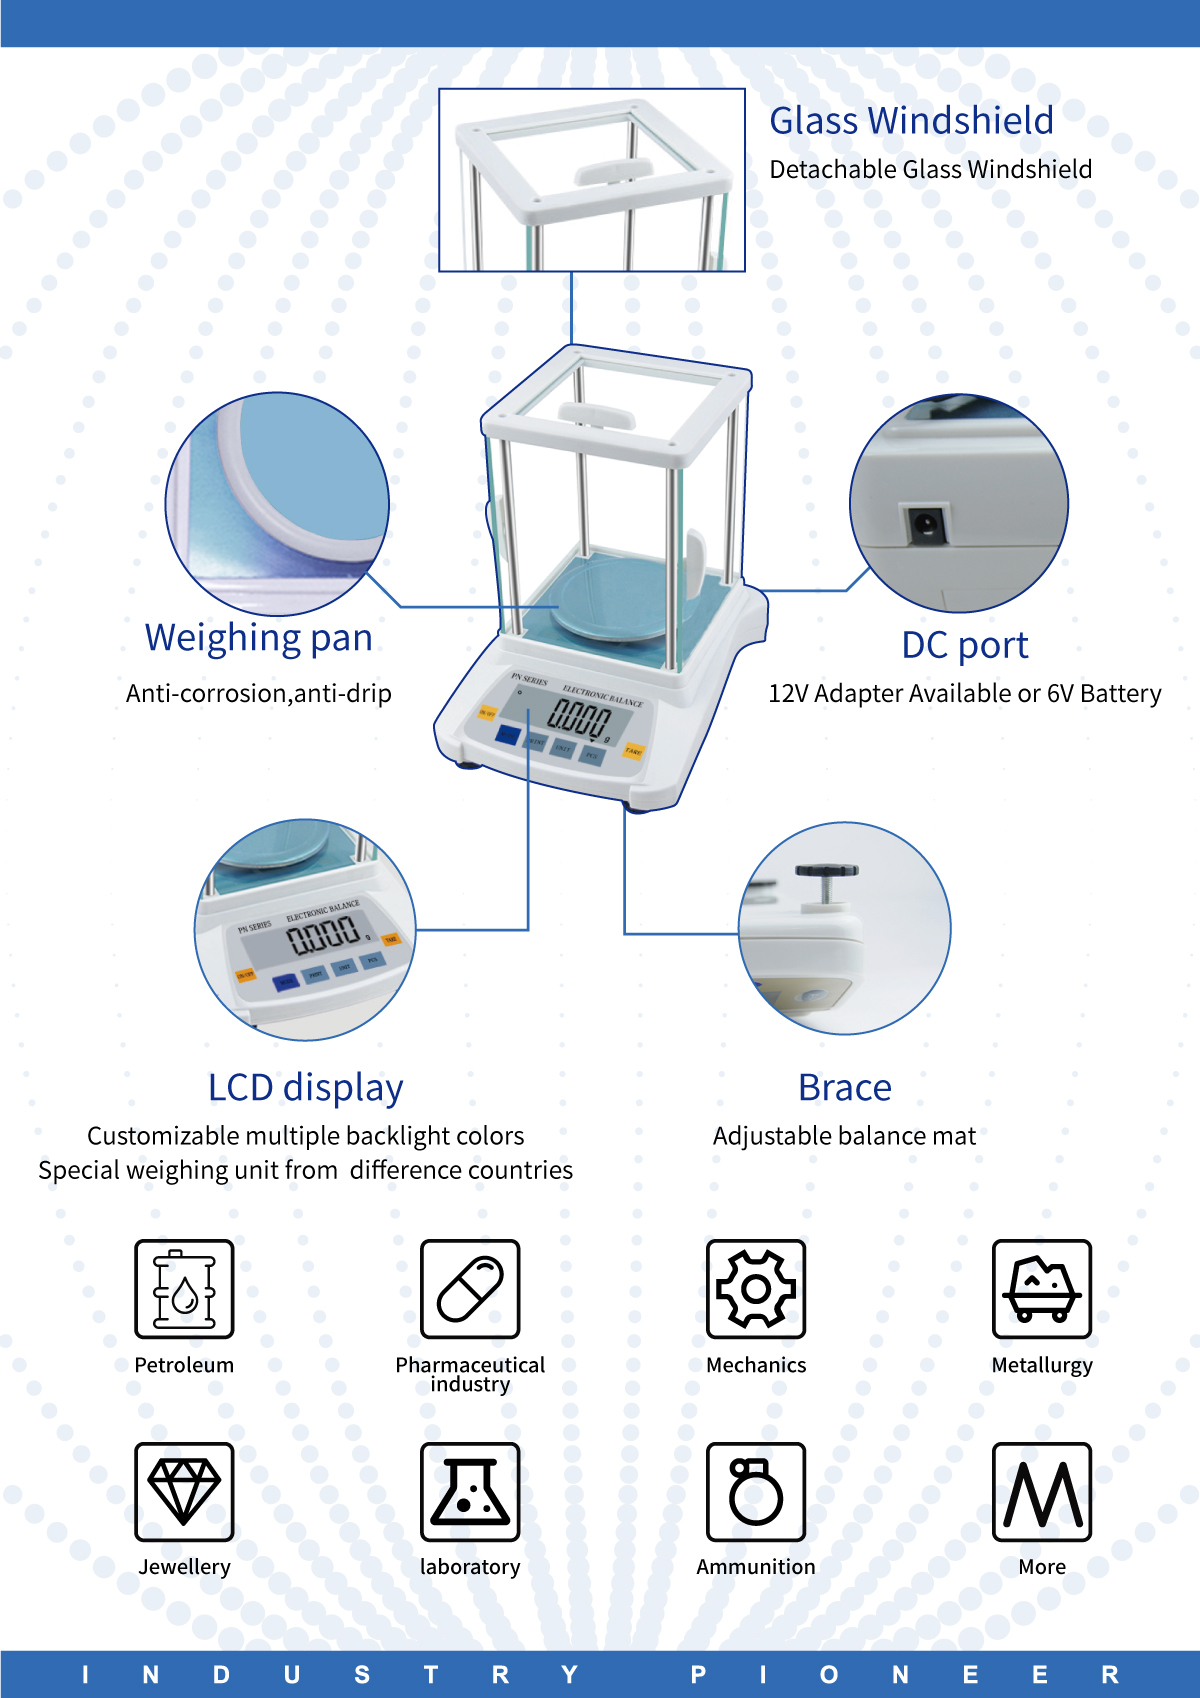 BDS-PN-A0.001g| Jewelry machine Jewelry tools Pharmaceutical lab Textile scale Precision analytical balance BDS-PN-A0.001g| Jewelry machine Jewelry tools Pharmaceutical lab Textile scale Precision analytical balance Textile scale,Jewelry tools,Pharmaceutical lab,Precision analytical balance,Jewelry machine